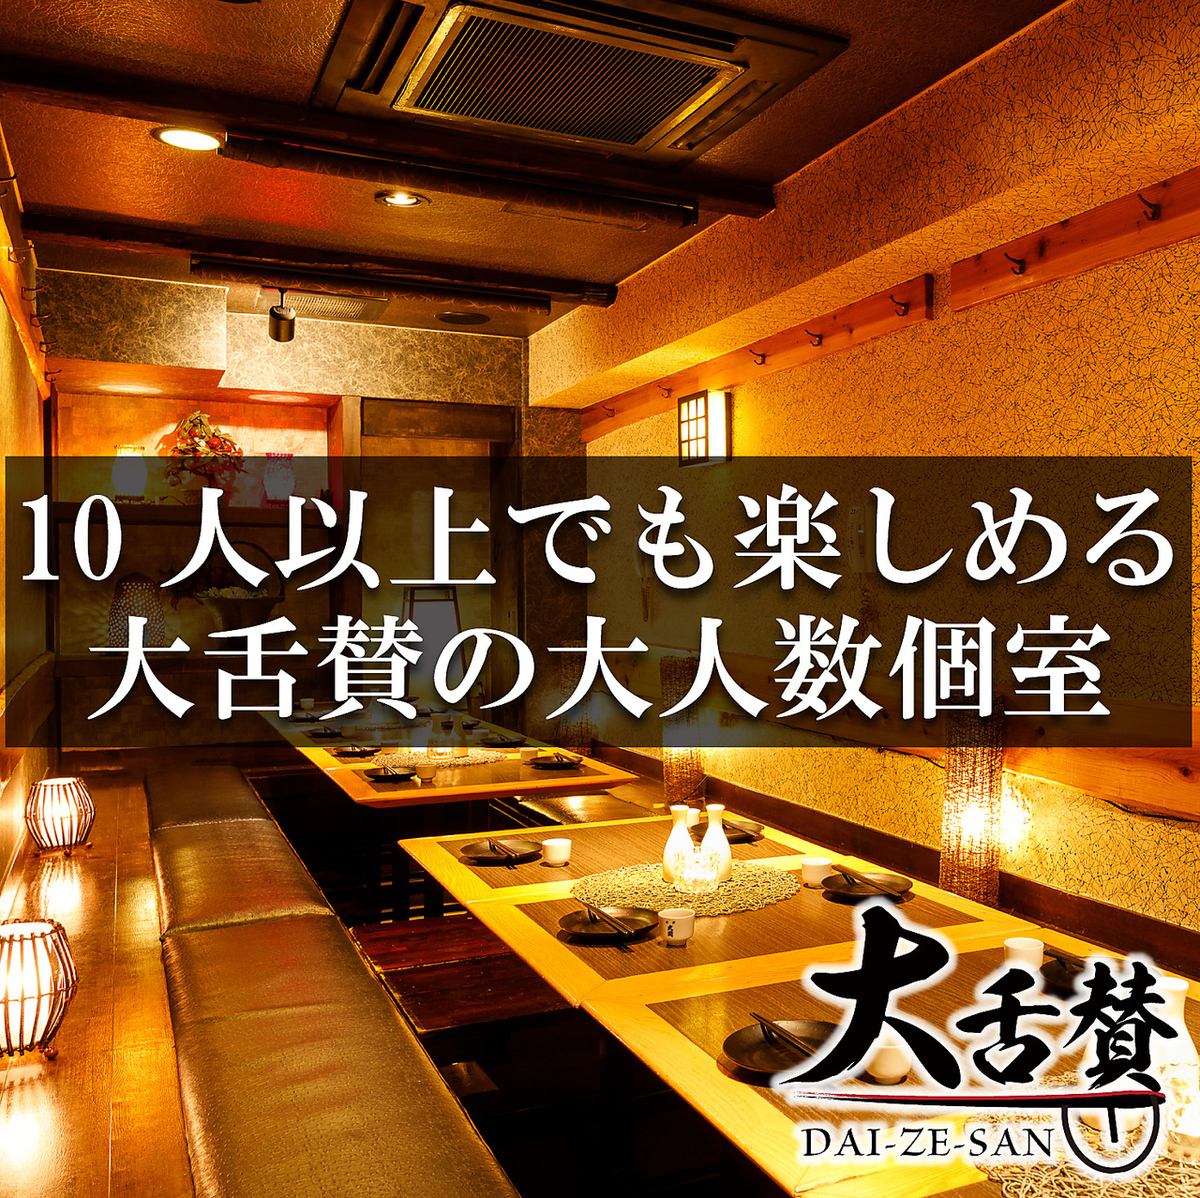 We also accept banquets for large numbers of people ♪ You can have a banquet with a luxurious course at a great value!!